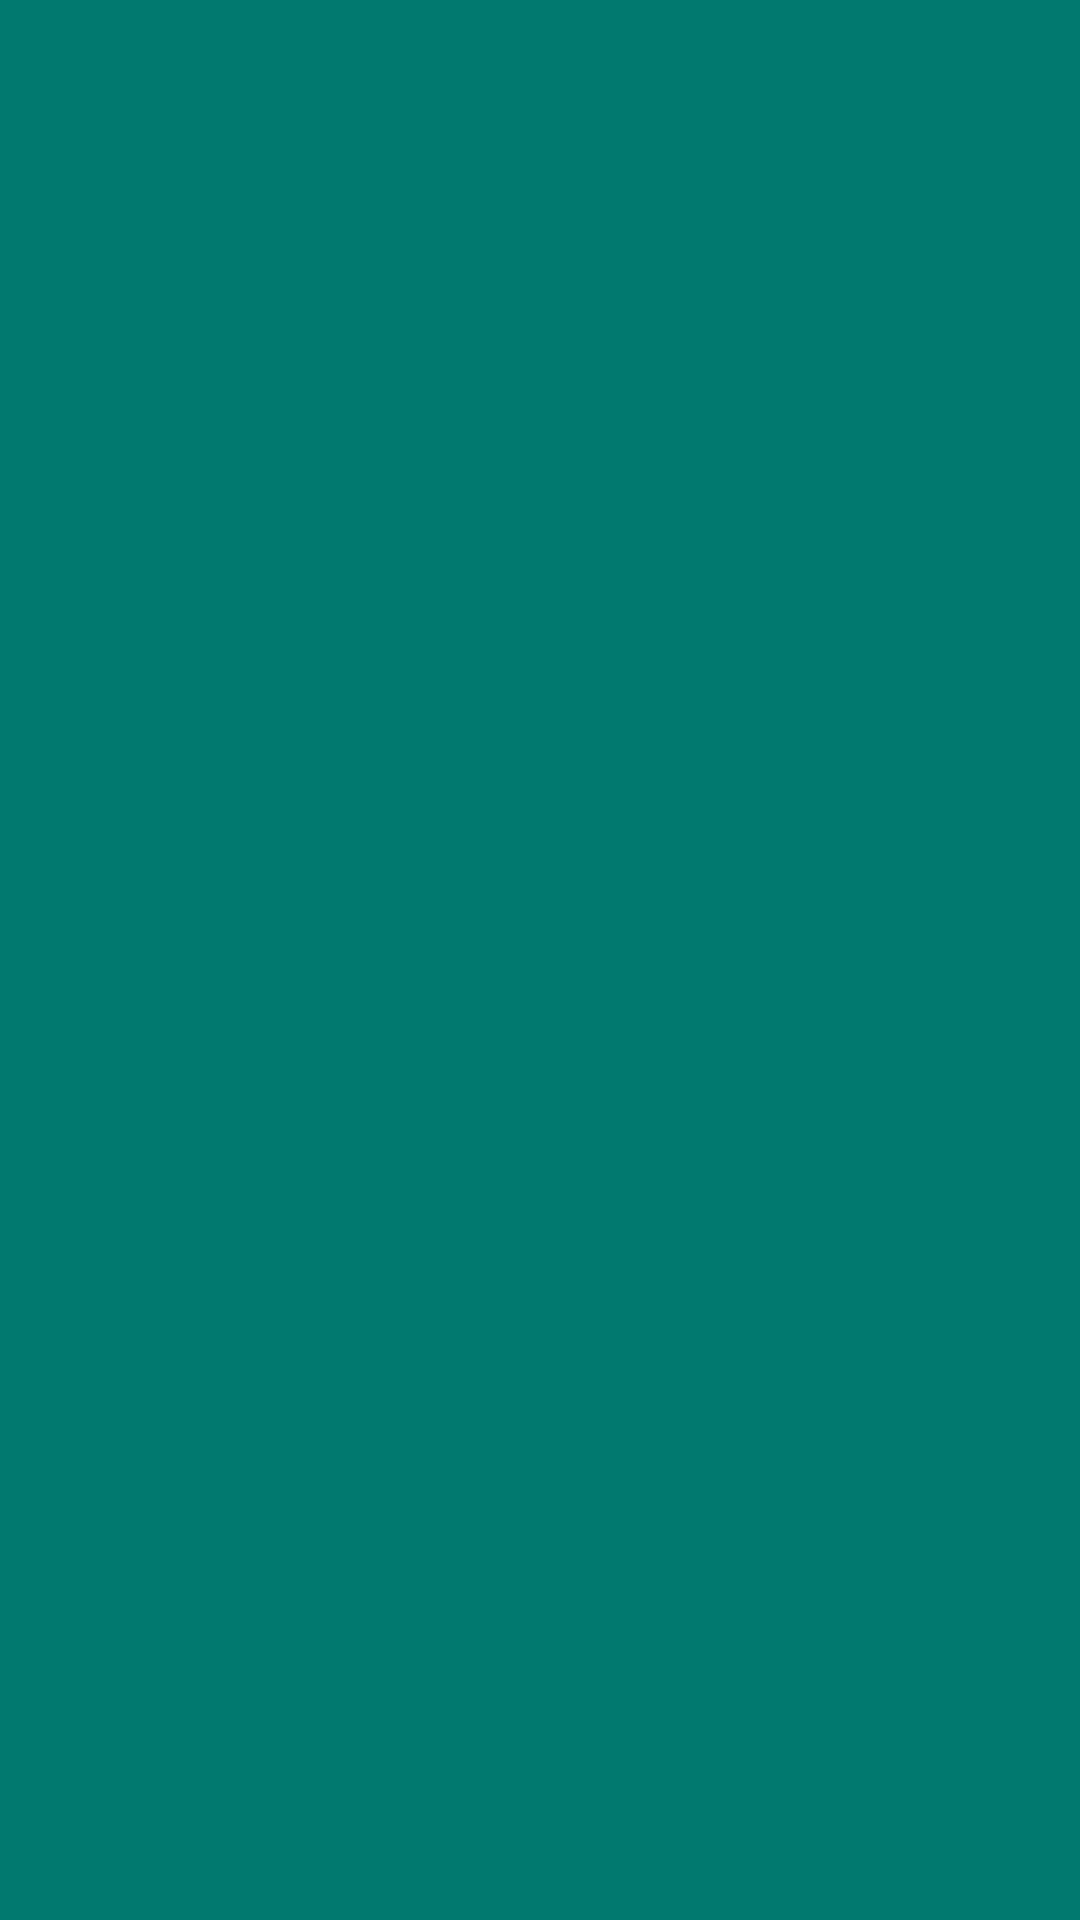 1080x1920 Pine Green Solid Color Background